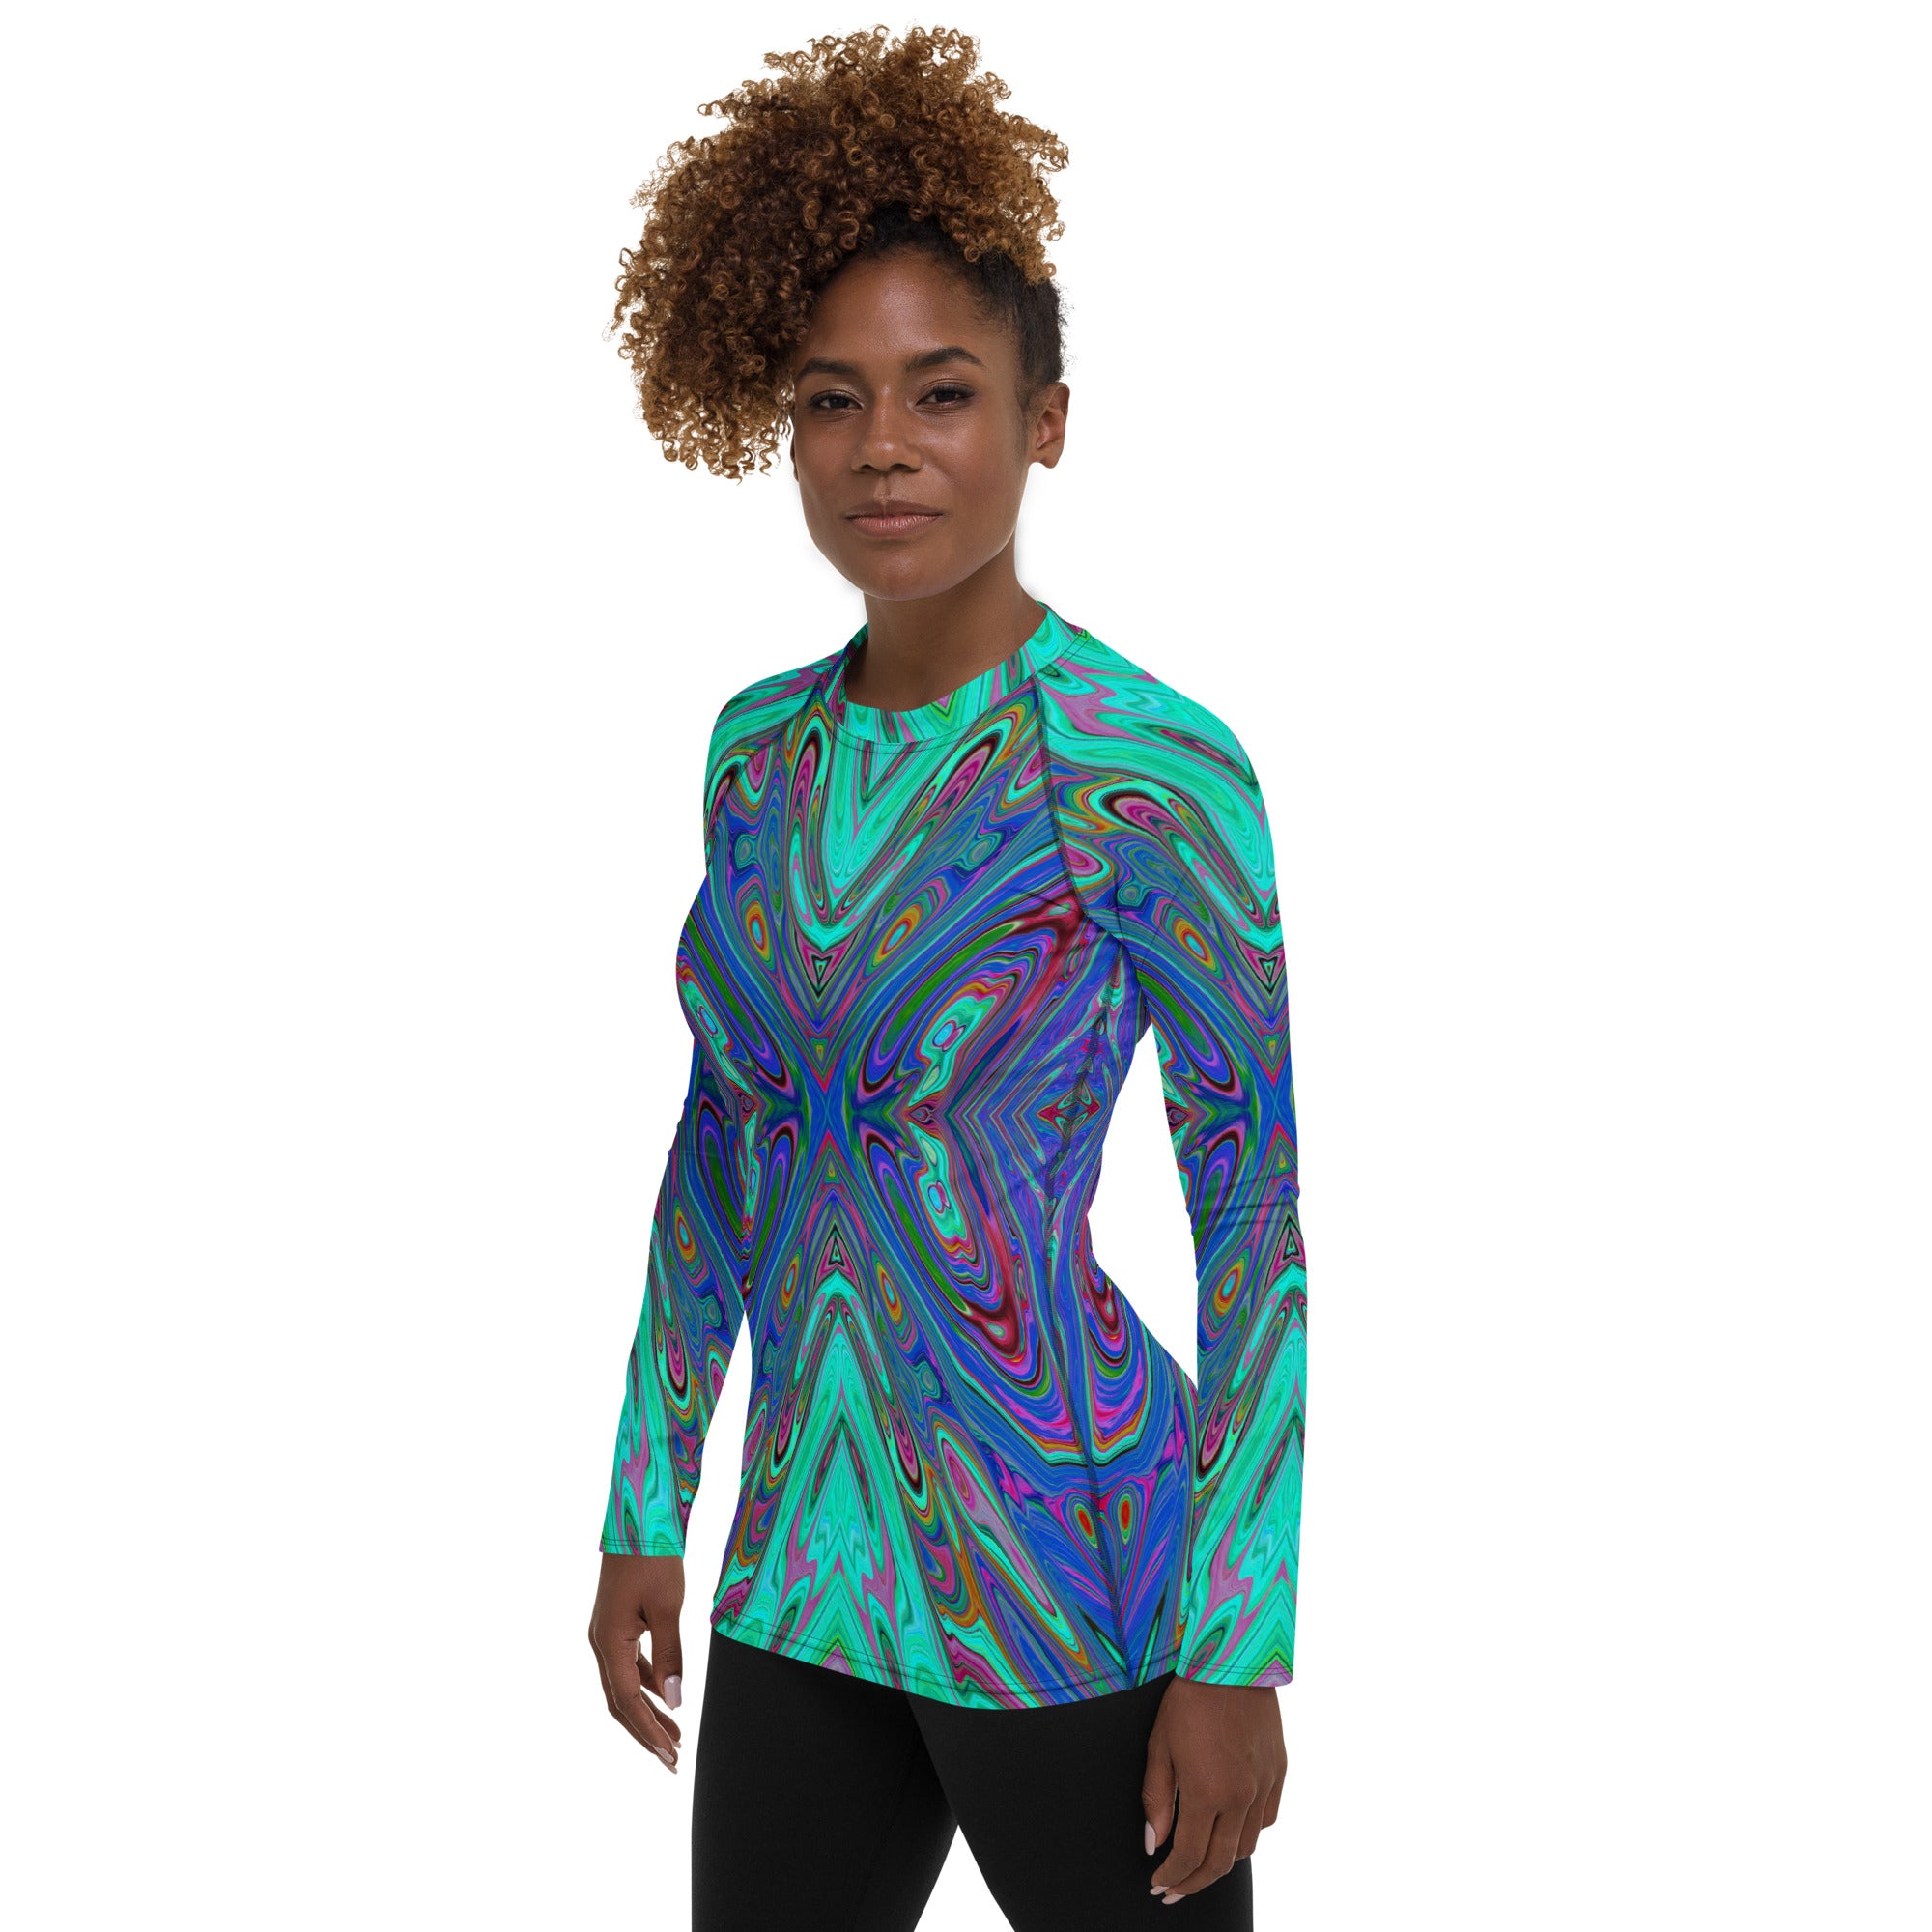 Women's Rash Guard Shirts, Trippy Retro Blue and Red Abstract Butterfly